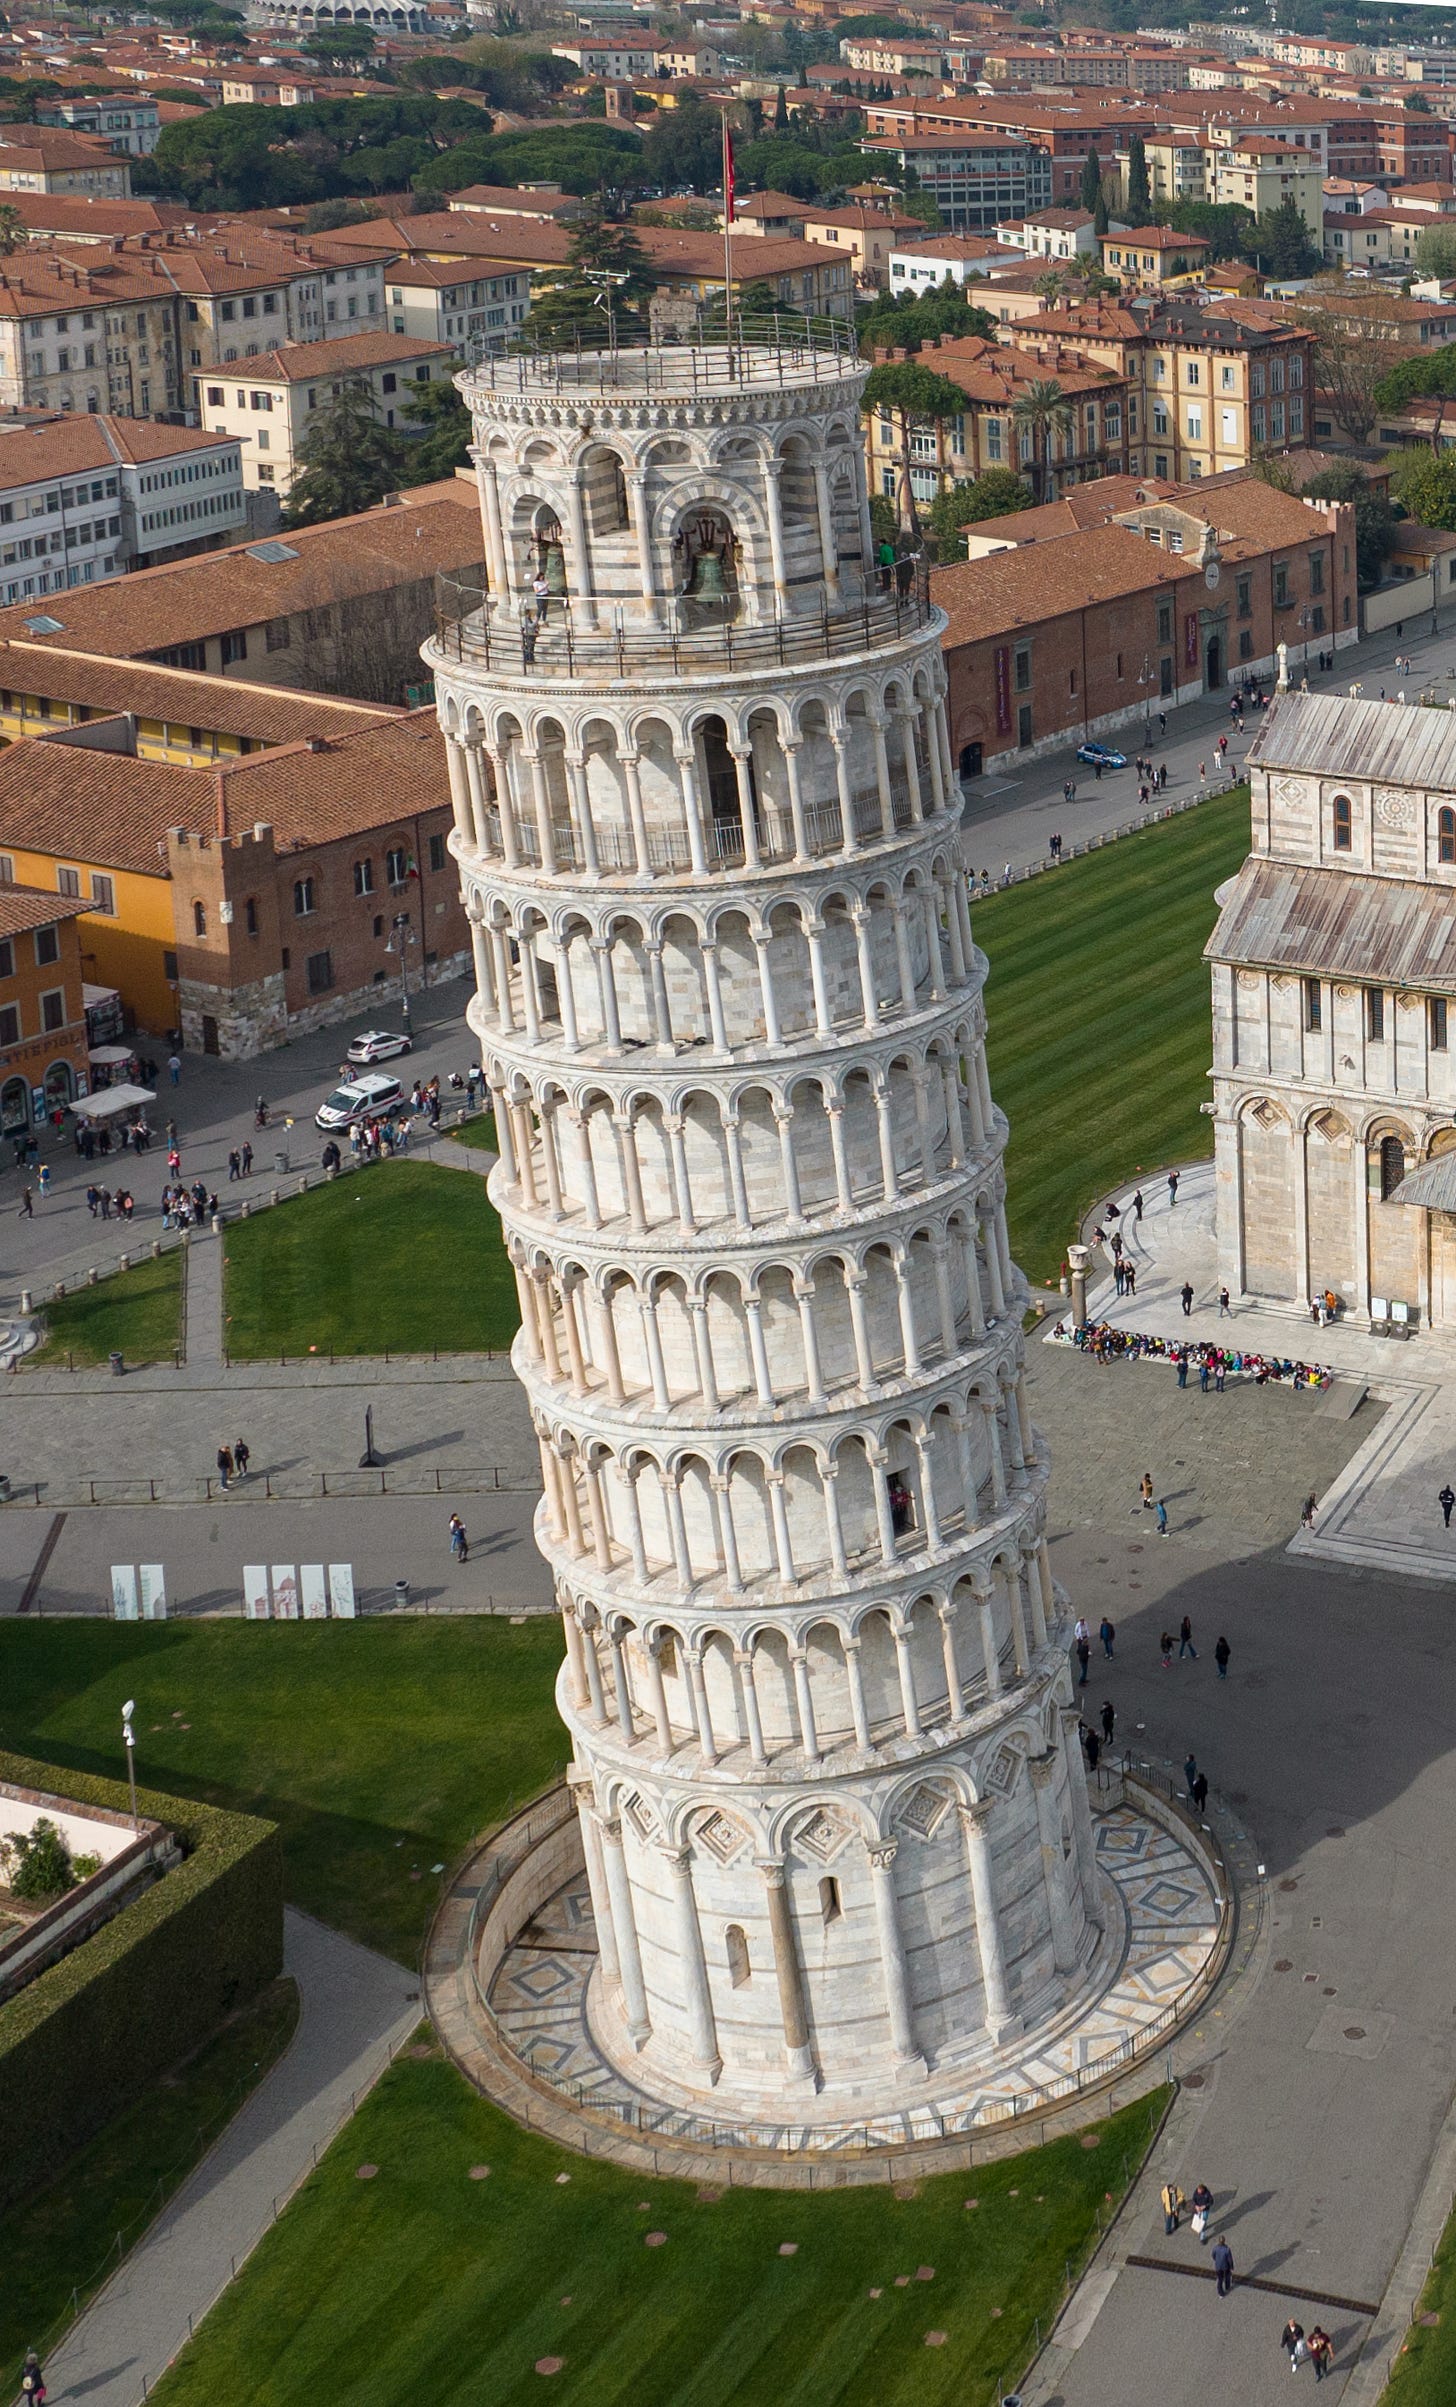 A photograph of the Leaning Tower of Pisa, Italy.